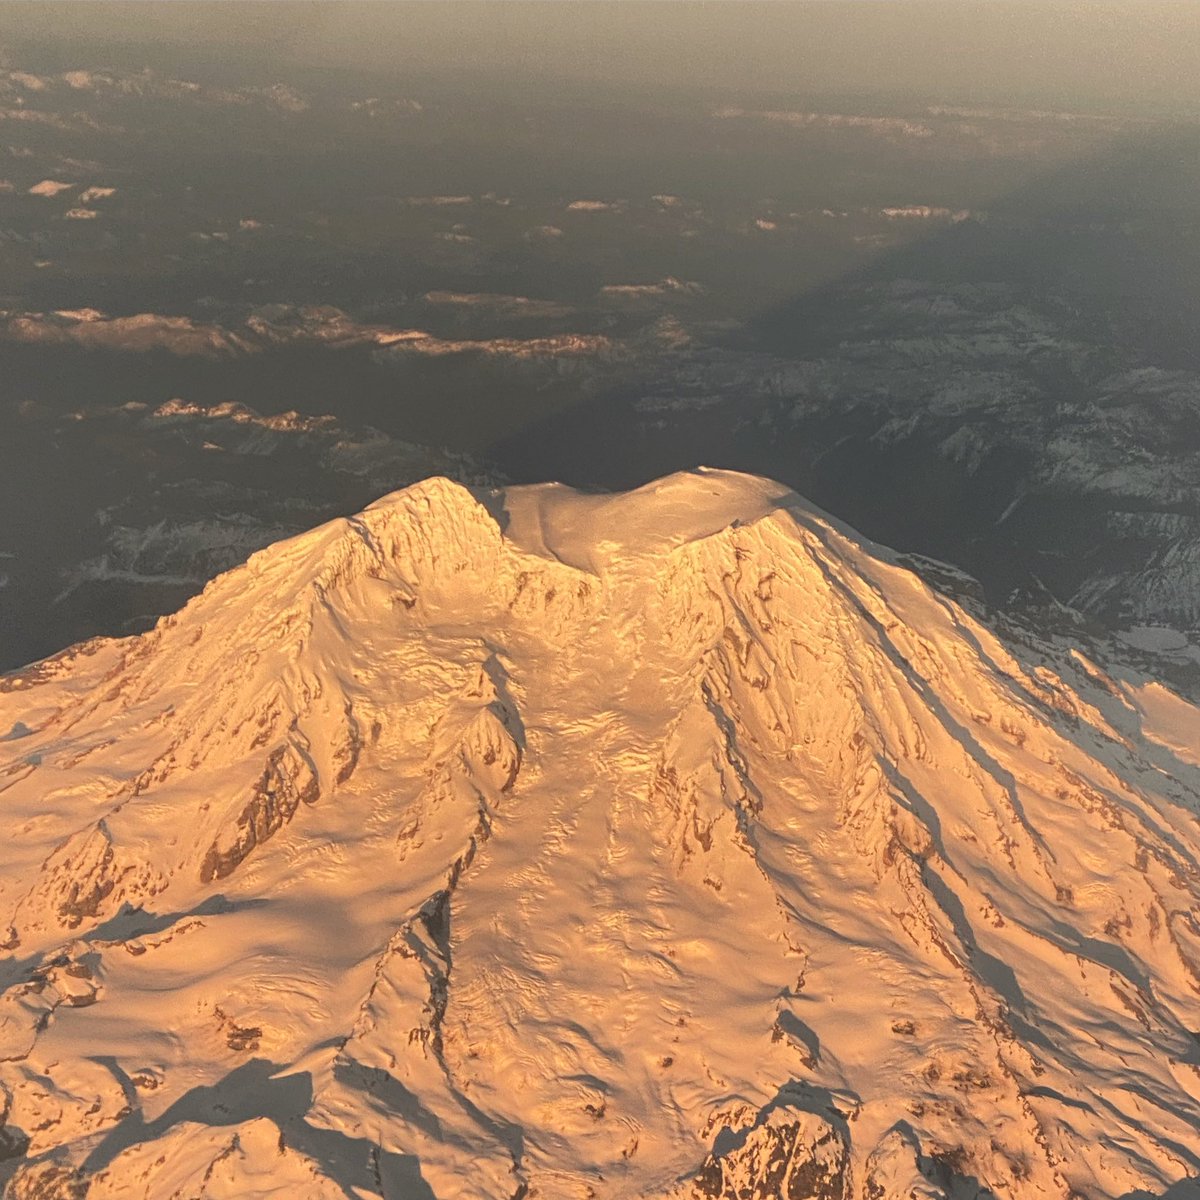 Coming into Seattle🛩🌈🏔 ⁣ ⁣
#landscapephotography #photography #photographyeveryday #photographyislife #photographylovers  #lovemountains #mountains #mountainscape #mountainslovers